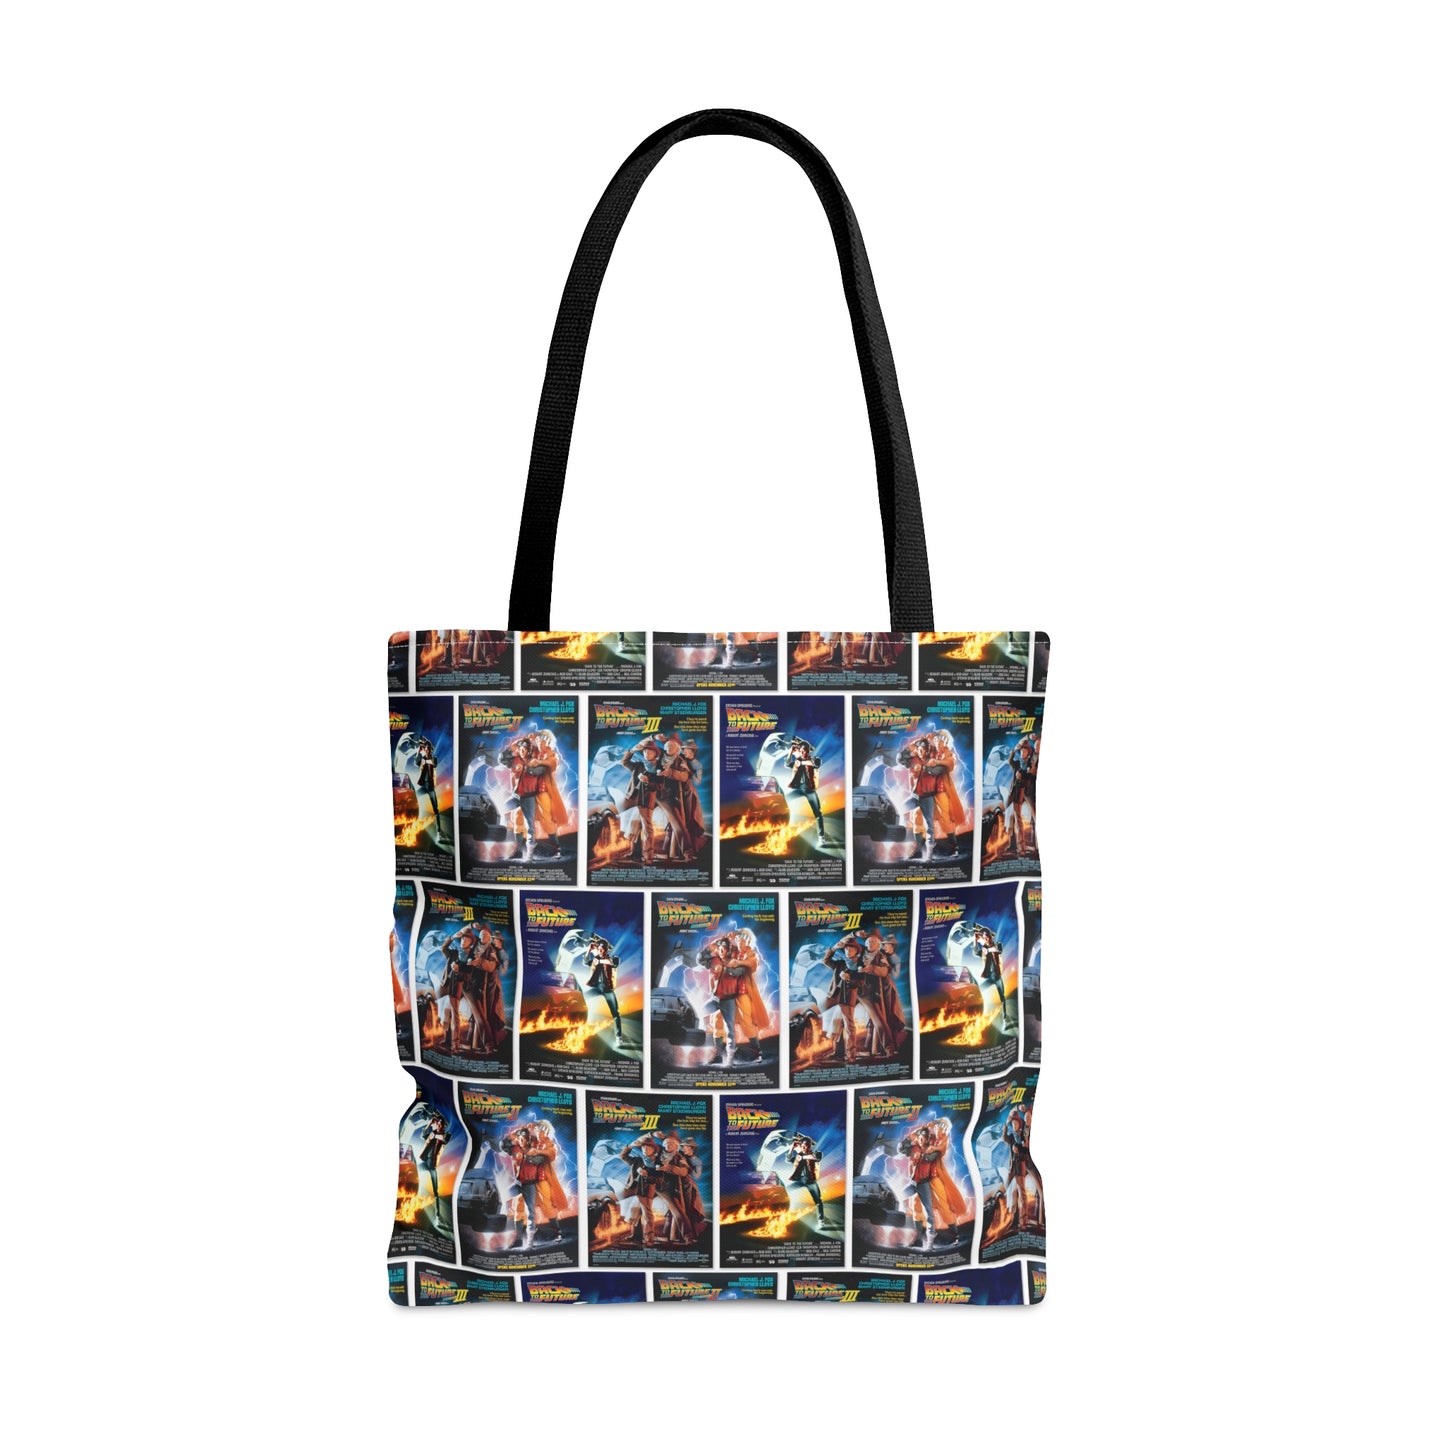 Back To The Future Movie Posters Collage Tote Bag